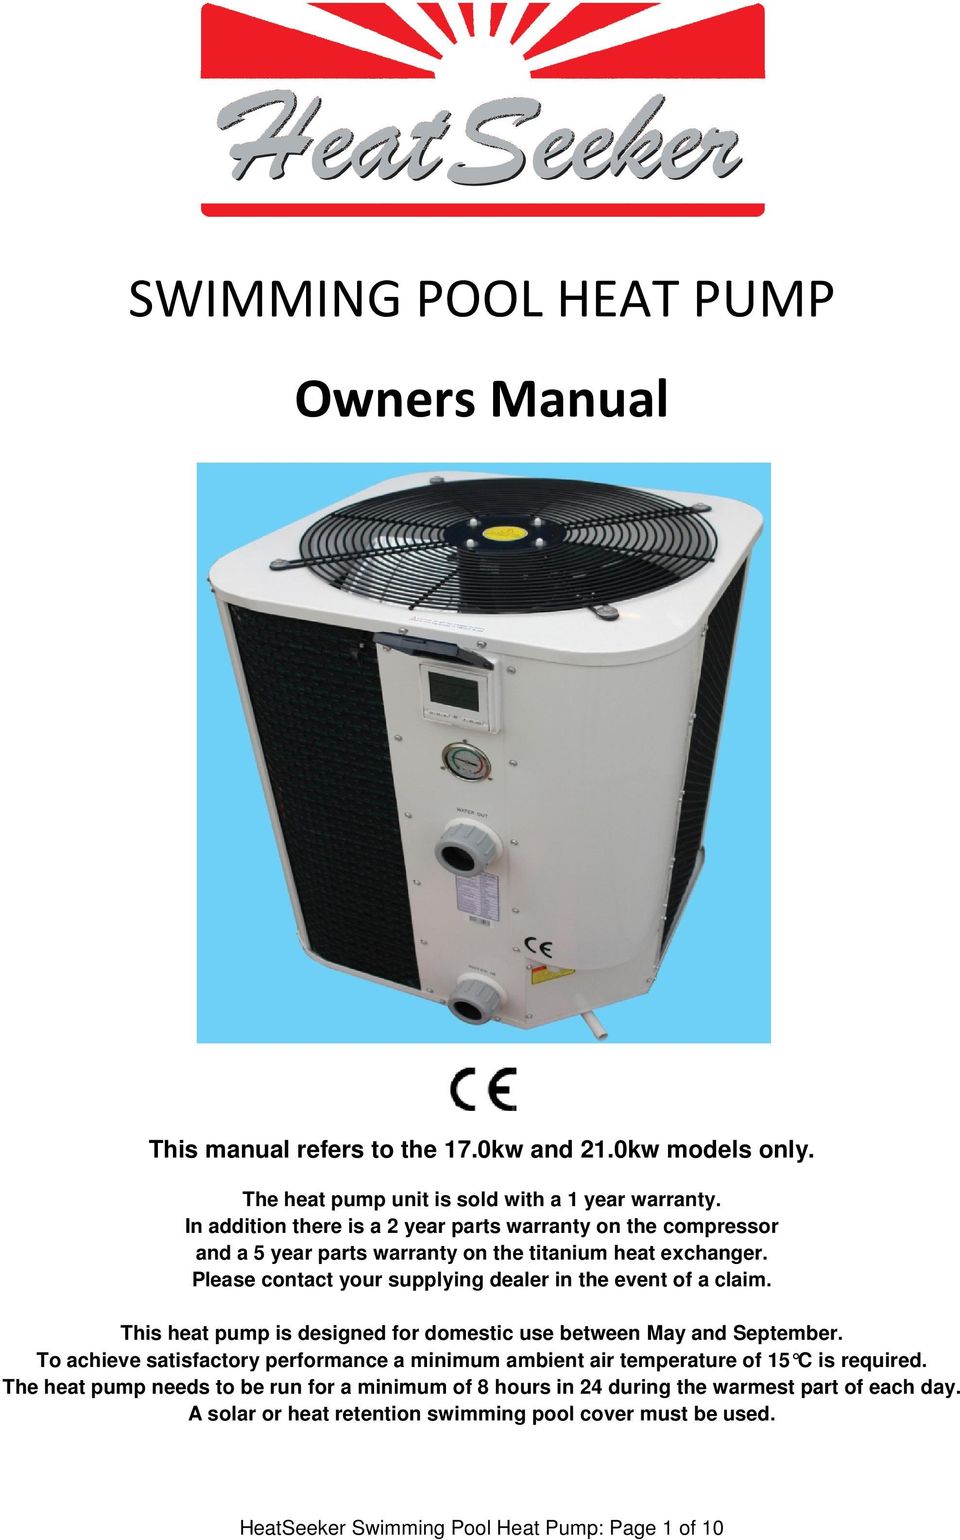 Please contact your supplying dealer in the event of a claim. This heat pump is designed for domestic use between May and September.